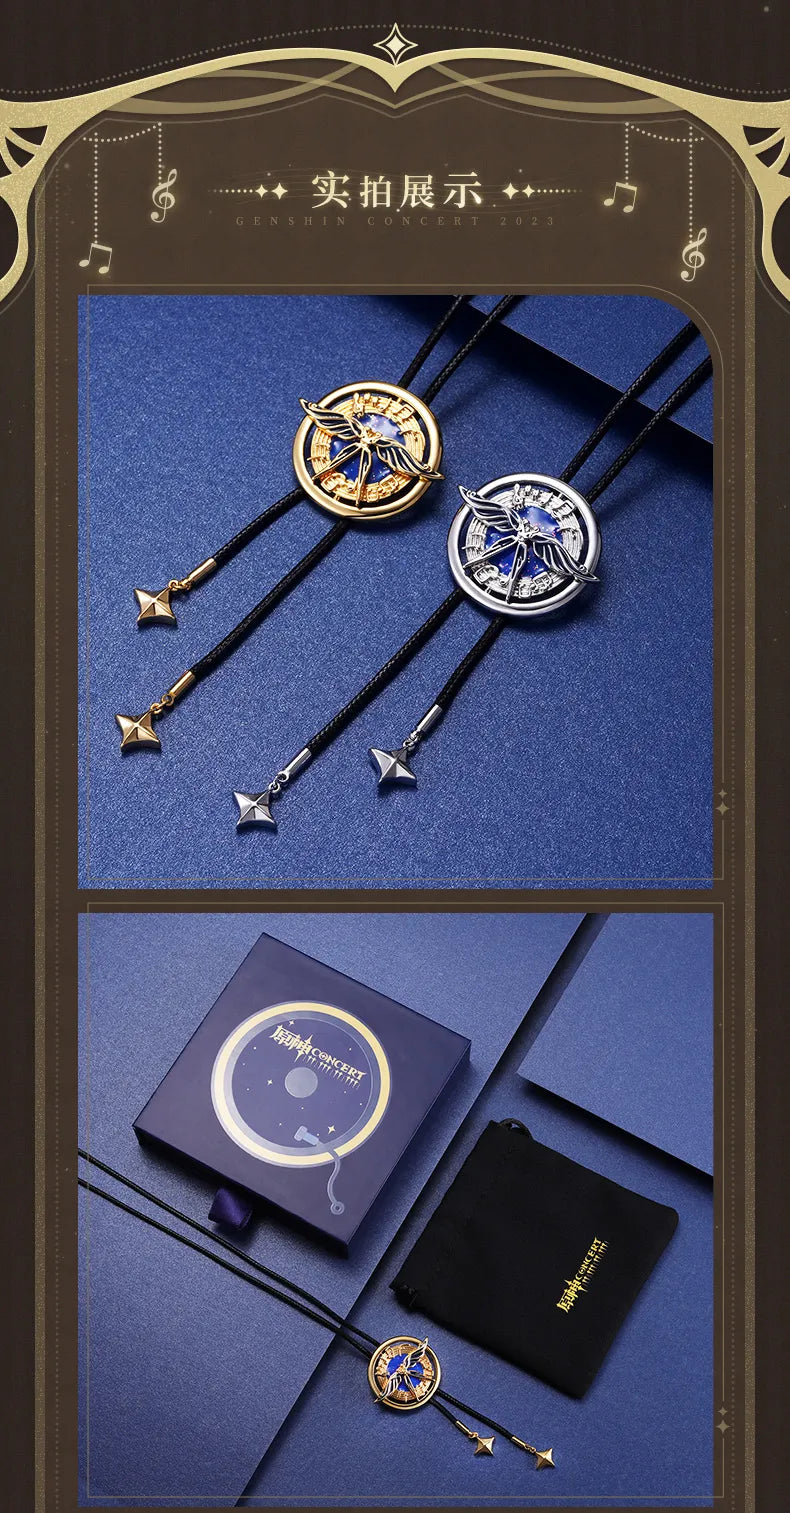 Genshin Impact - 2023 Concert - Melodies of an Endless Journey Wind Glider Necklace